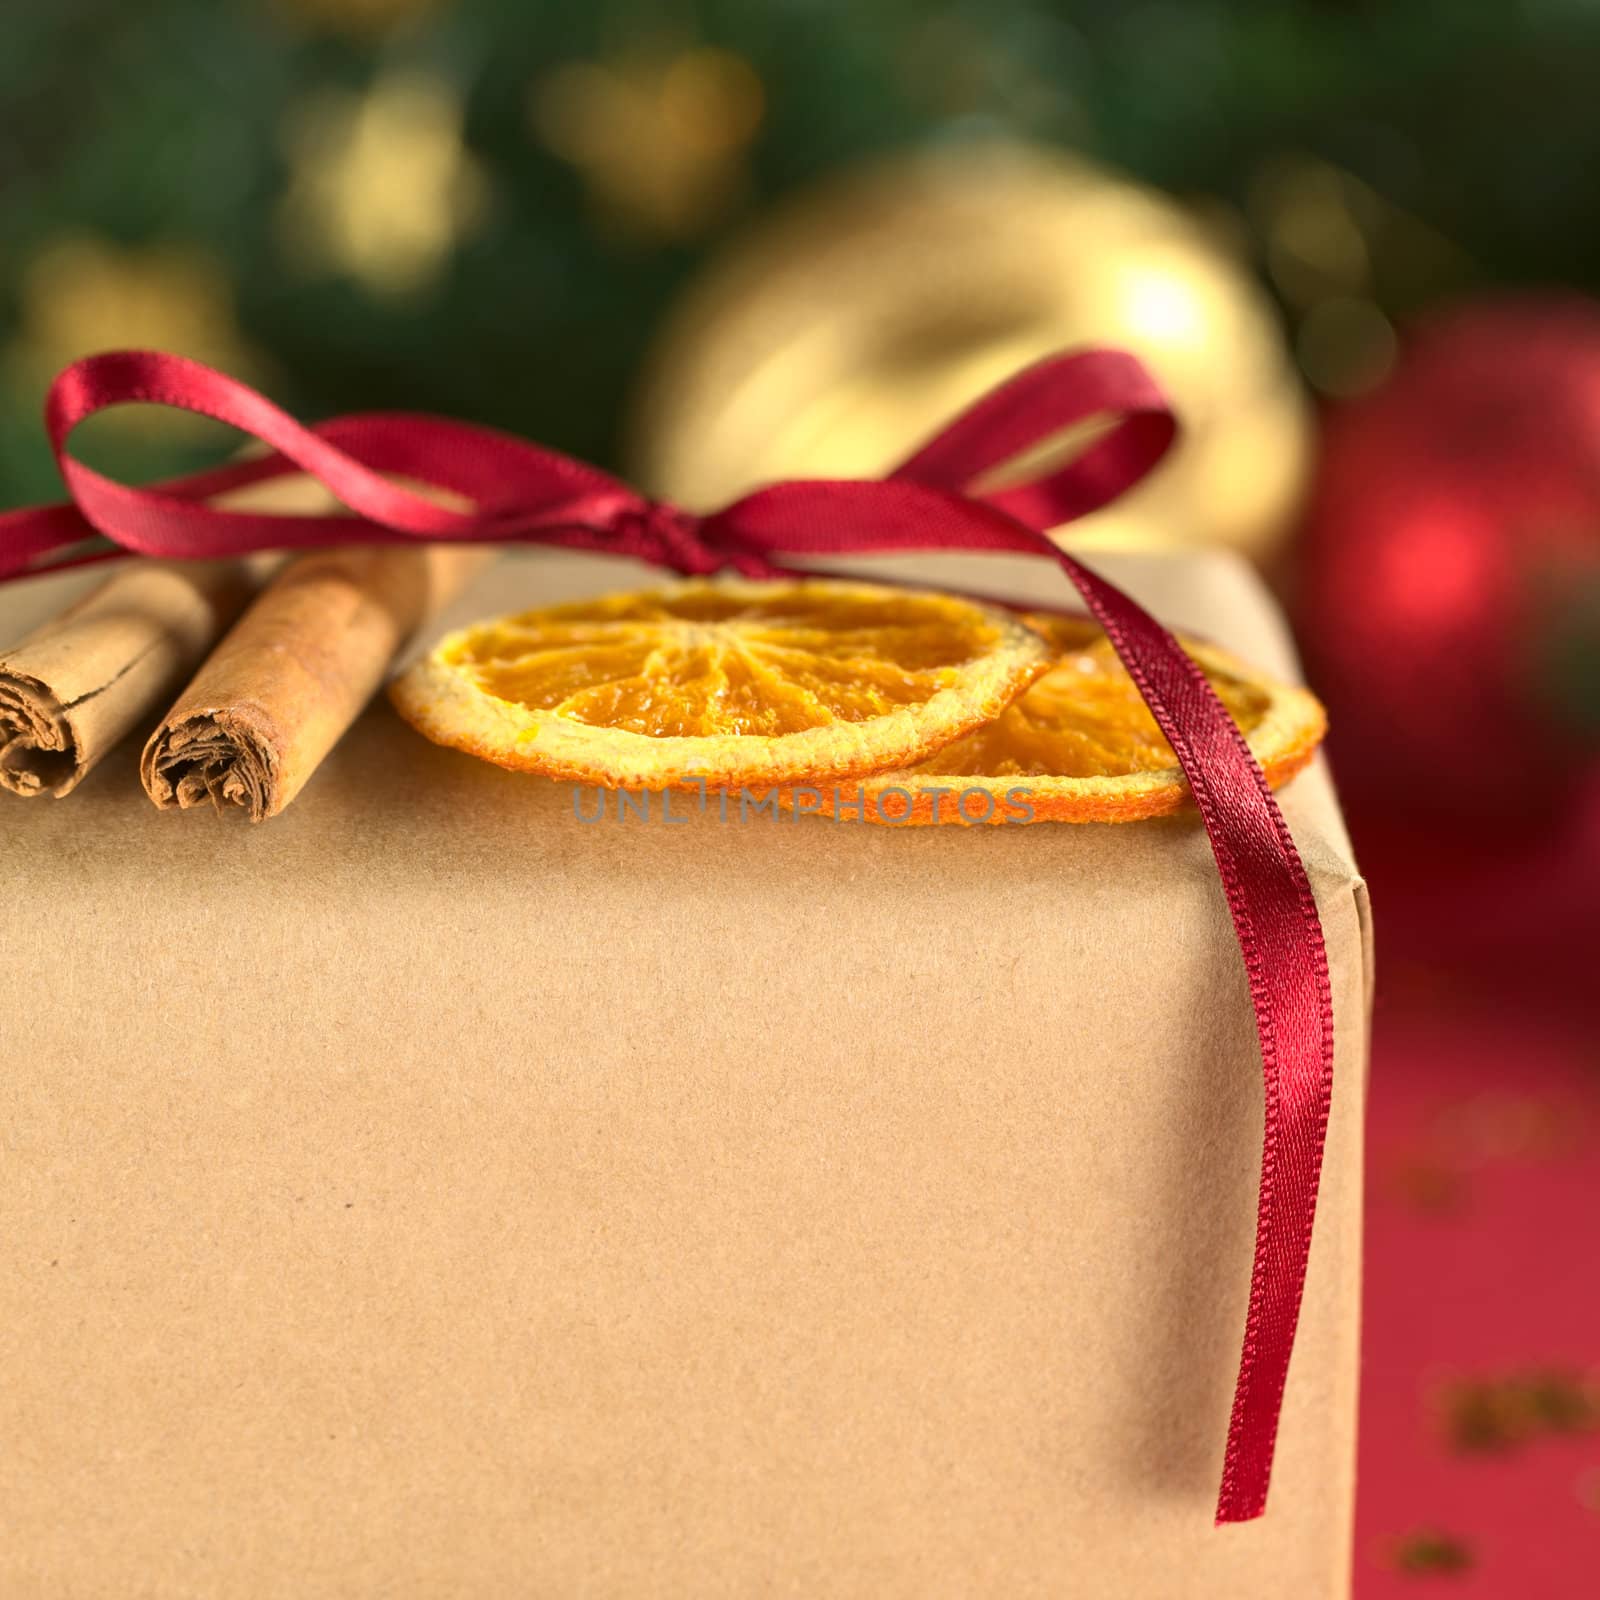 Christmas present decorated with dried orange slices and cinnamon (Selective Focus, Focus on the front of the orange slices and the cinnamon stick)